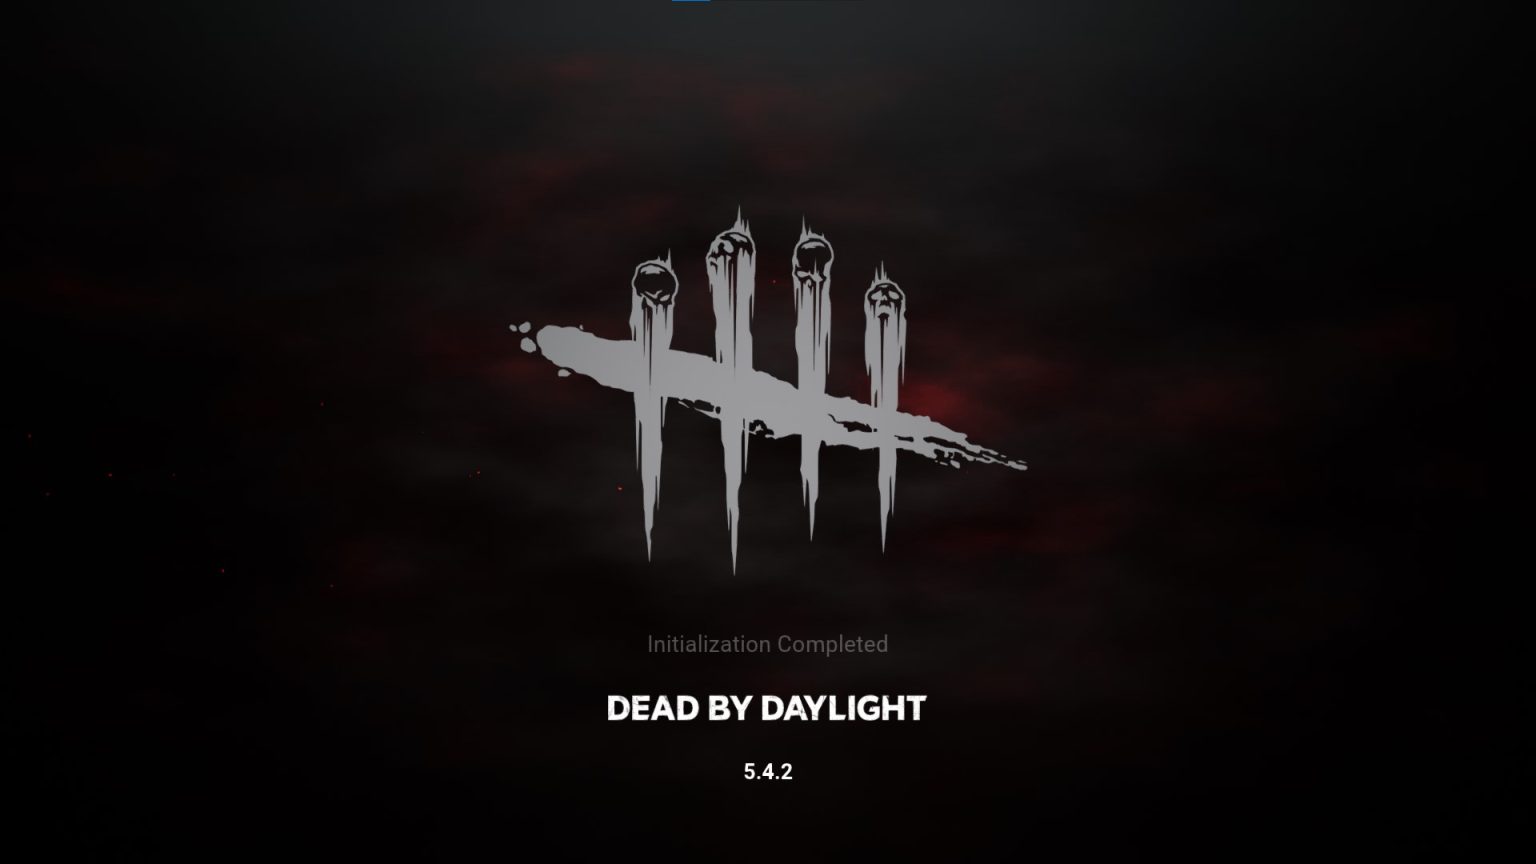 How To Fix Dead By Daylight Keeps Crashing On PC